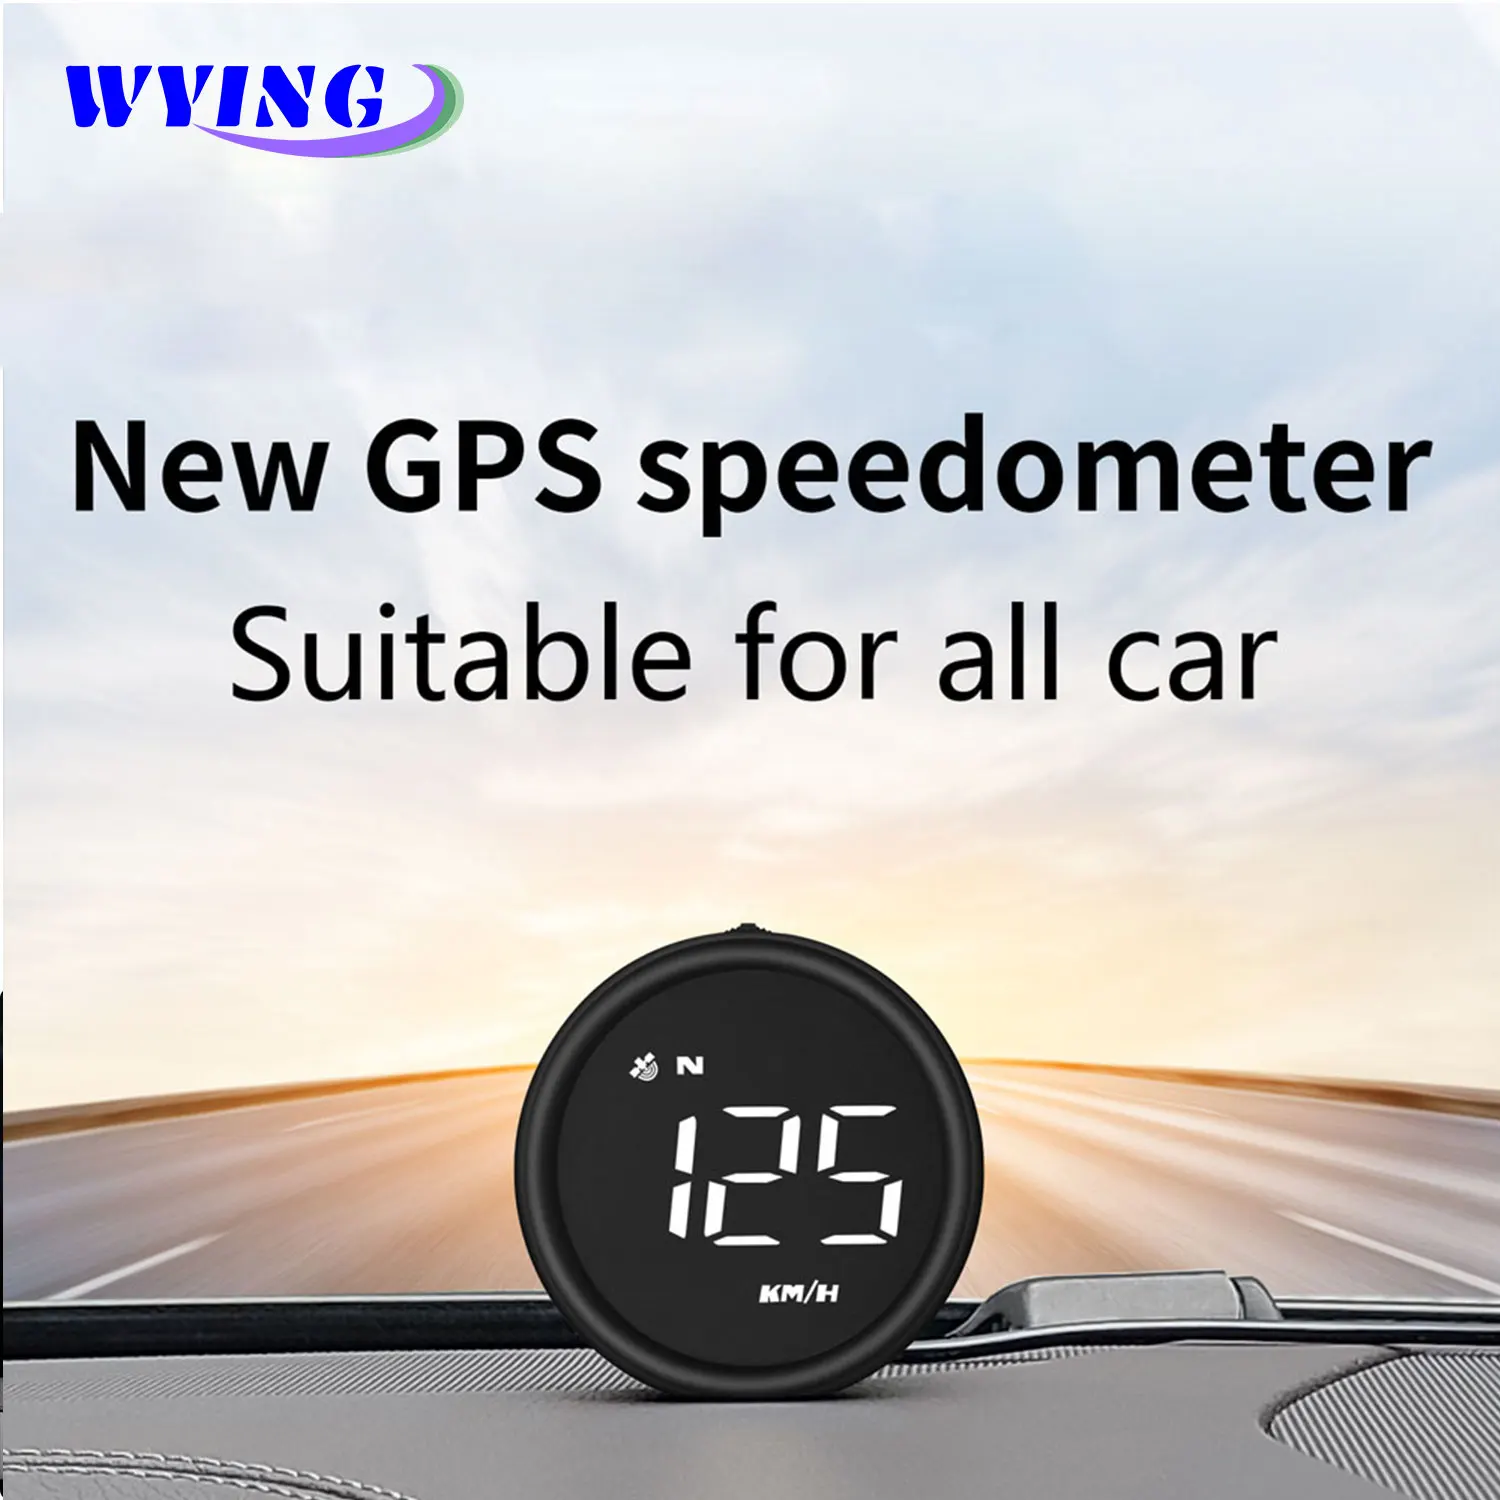 

WYING G1 HUD Head-Up Display GPS KM/H MPH Speedometer Speeding Warning System Suitable For All Car